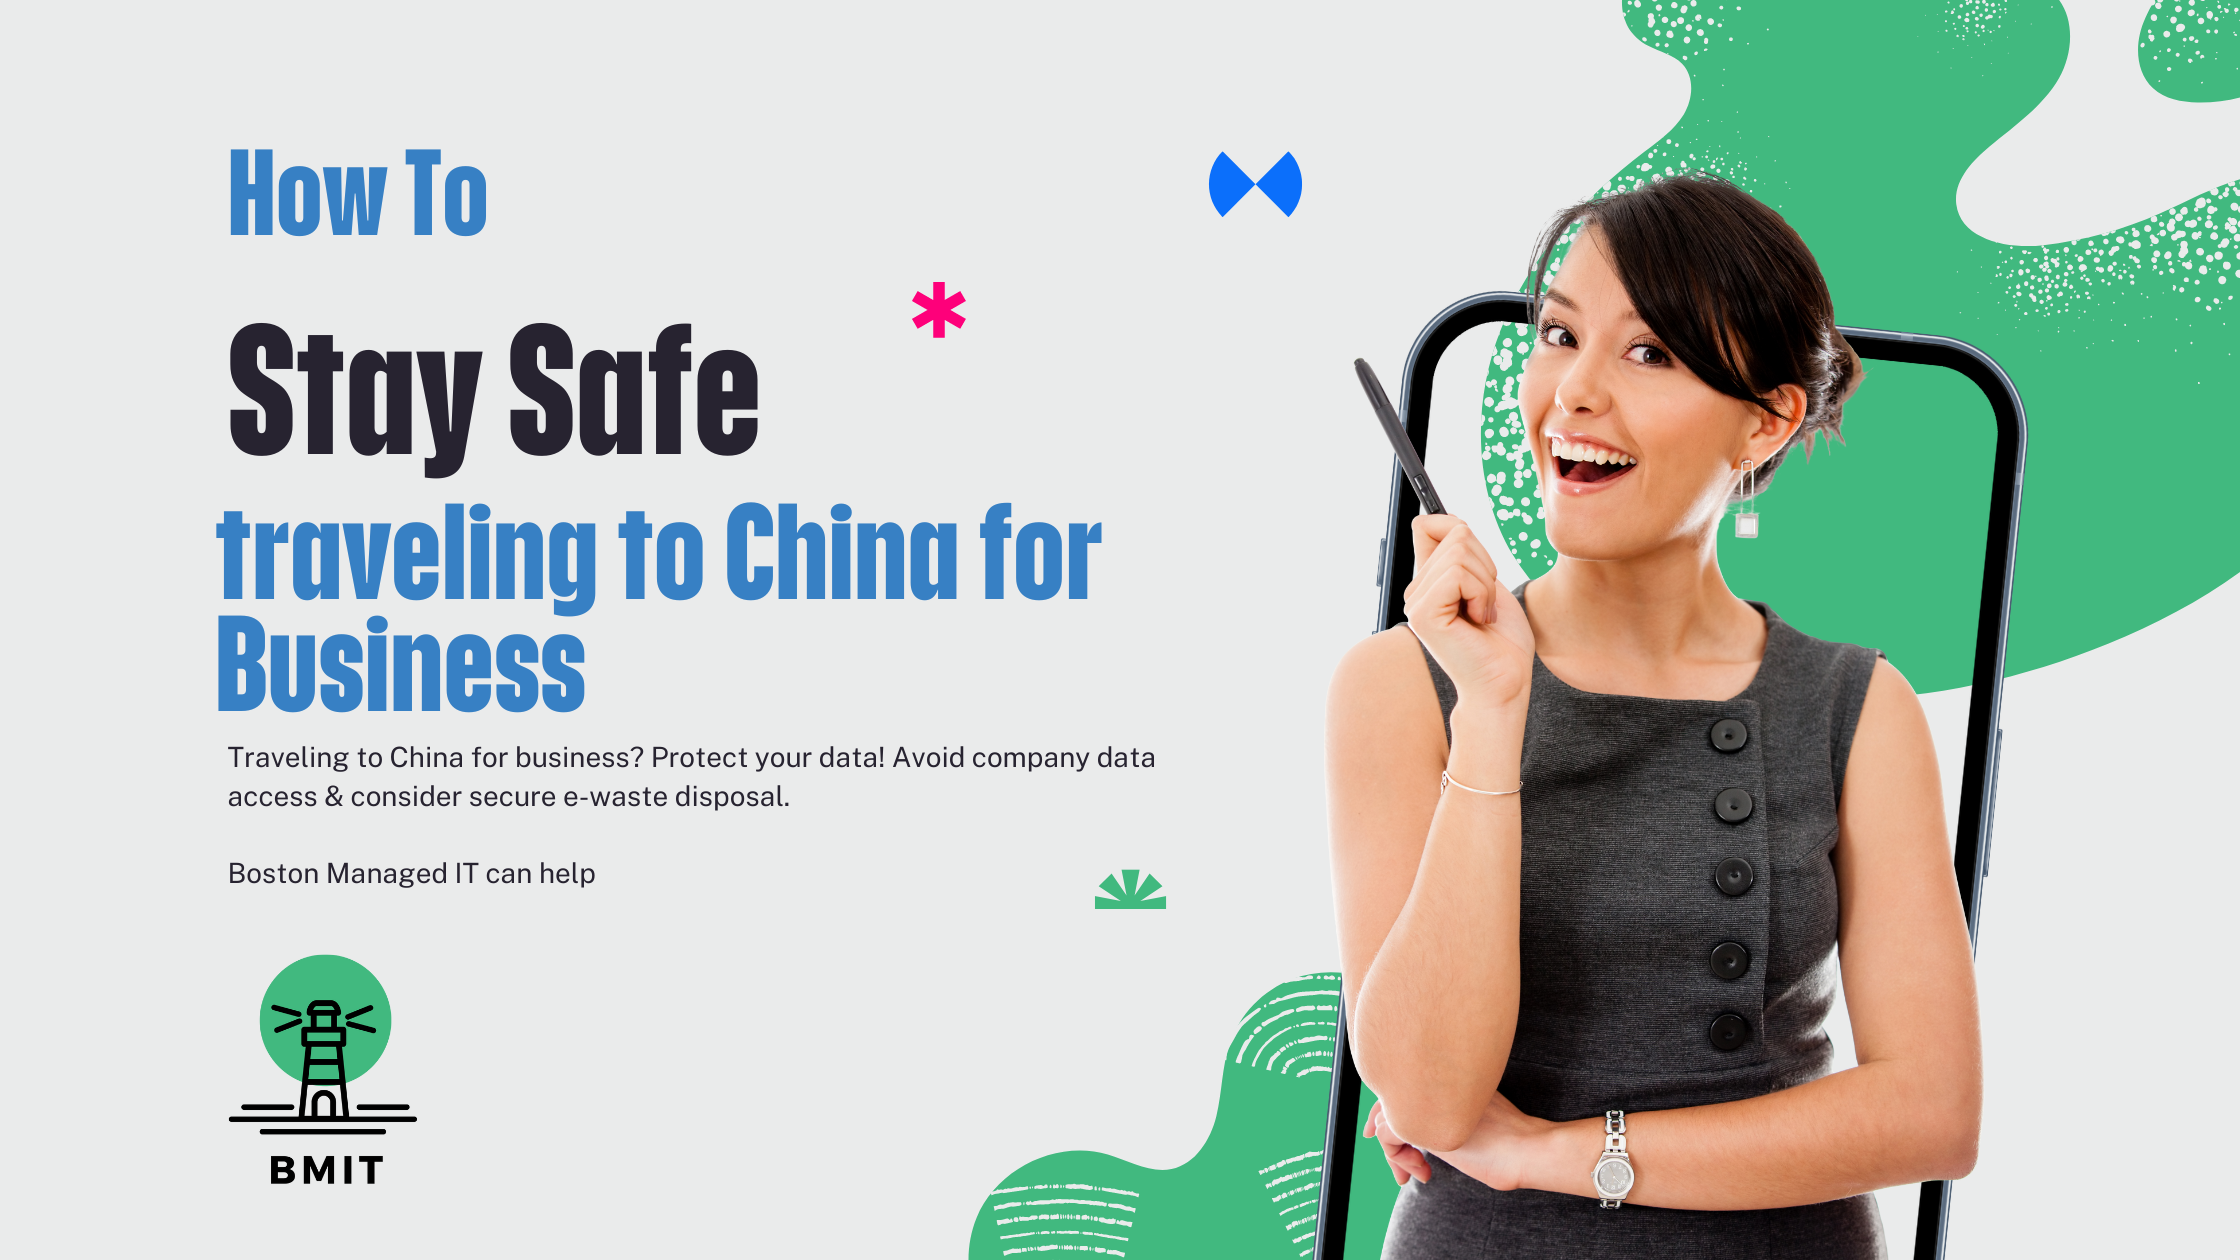 How can my company stay safe while traveling to China for Business?